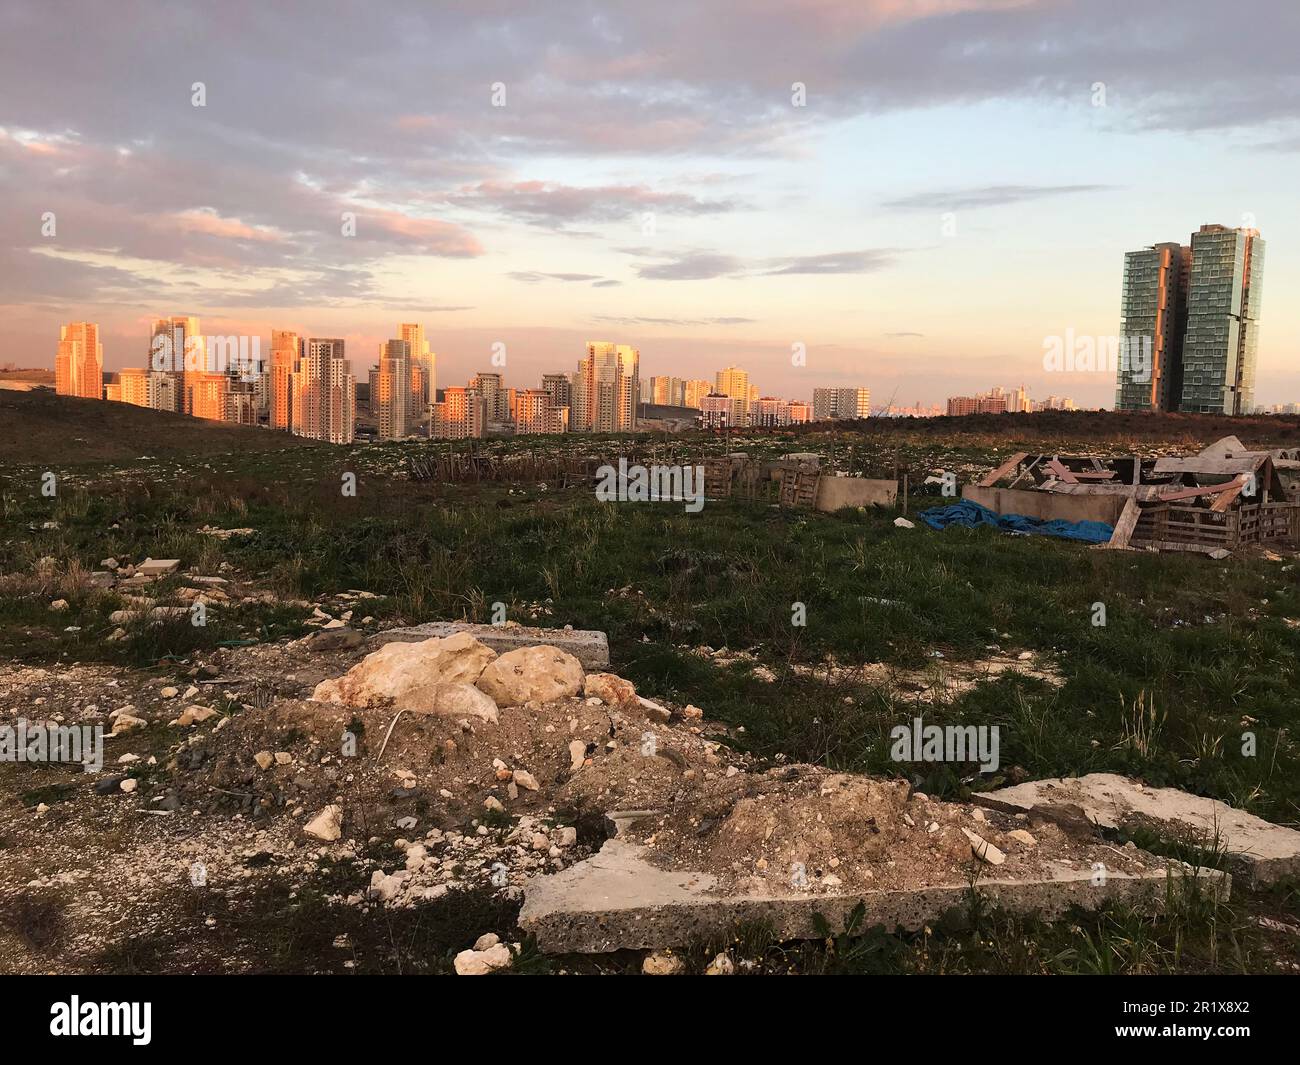 Barren land and modern buildings at sunset in Istanbul, Turkey. Stock Photo